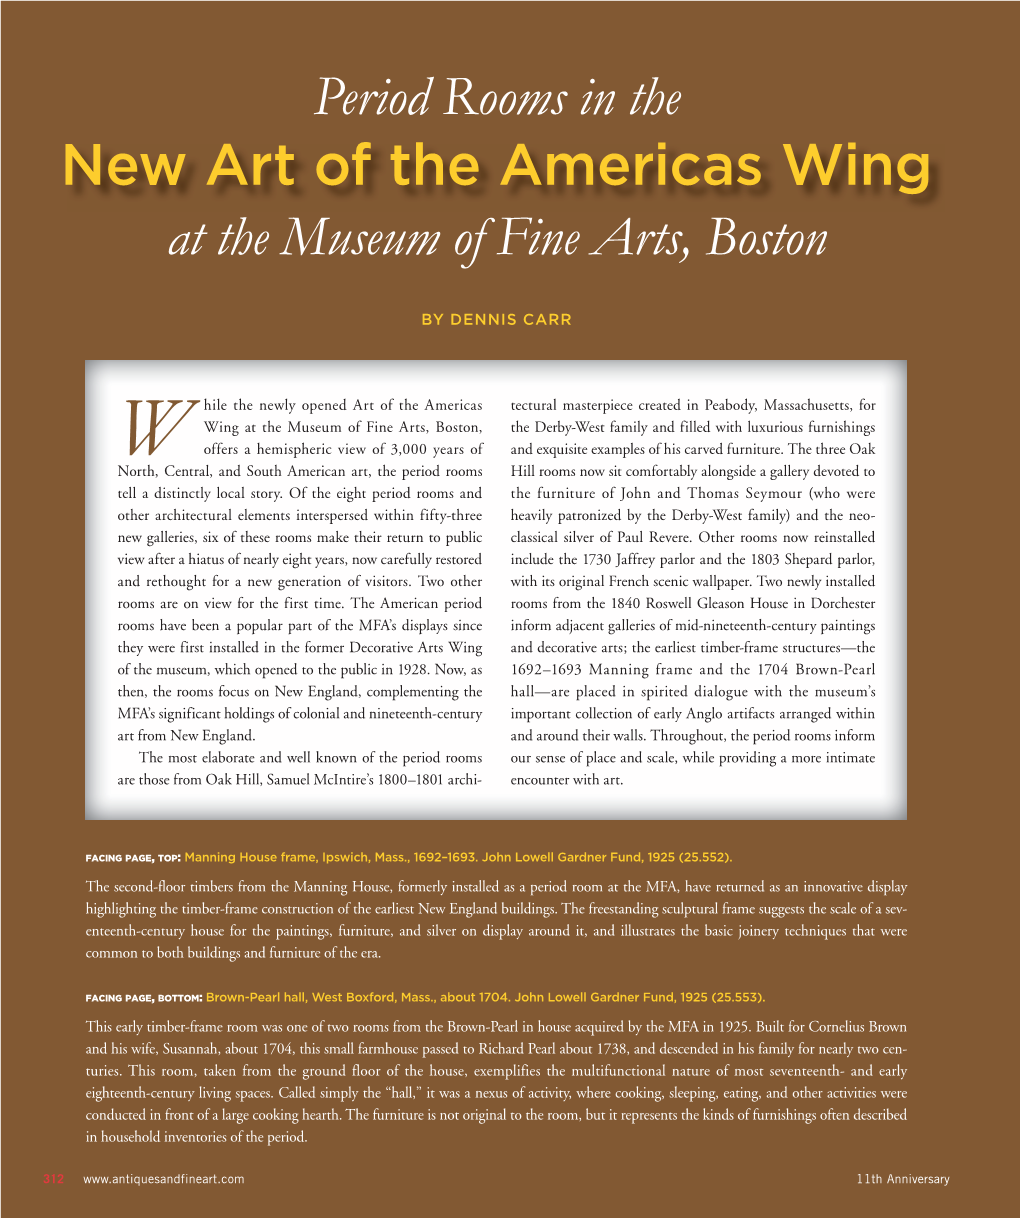 New Art of the Americas Wing at the Museum of Fine Arts, Boston